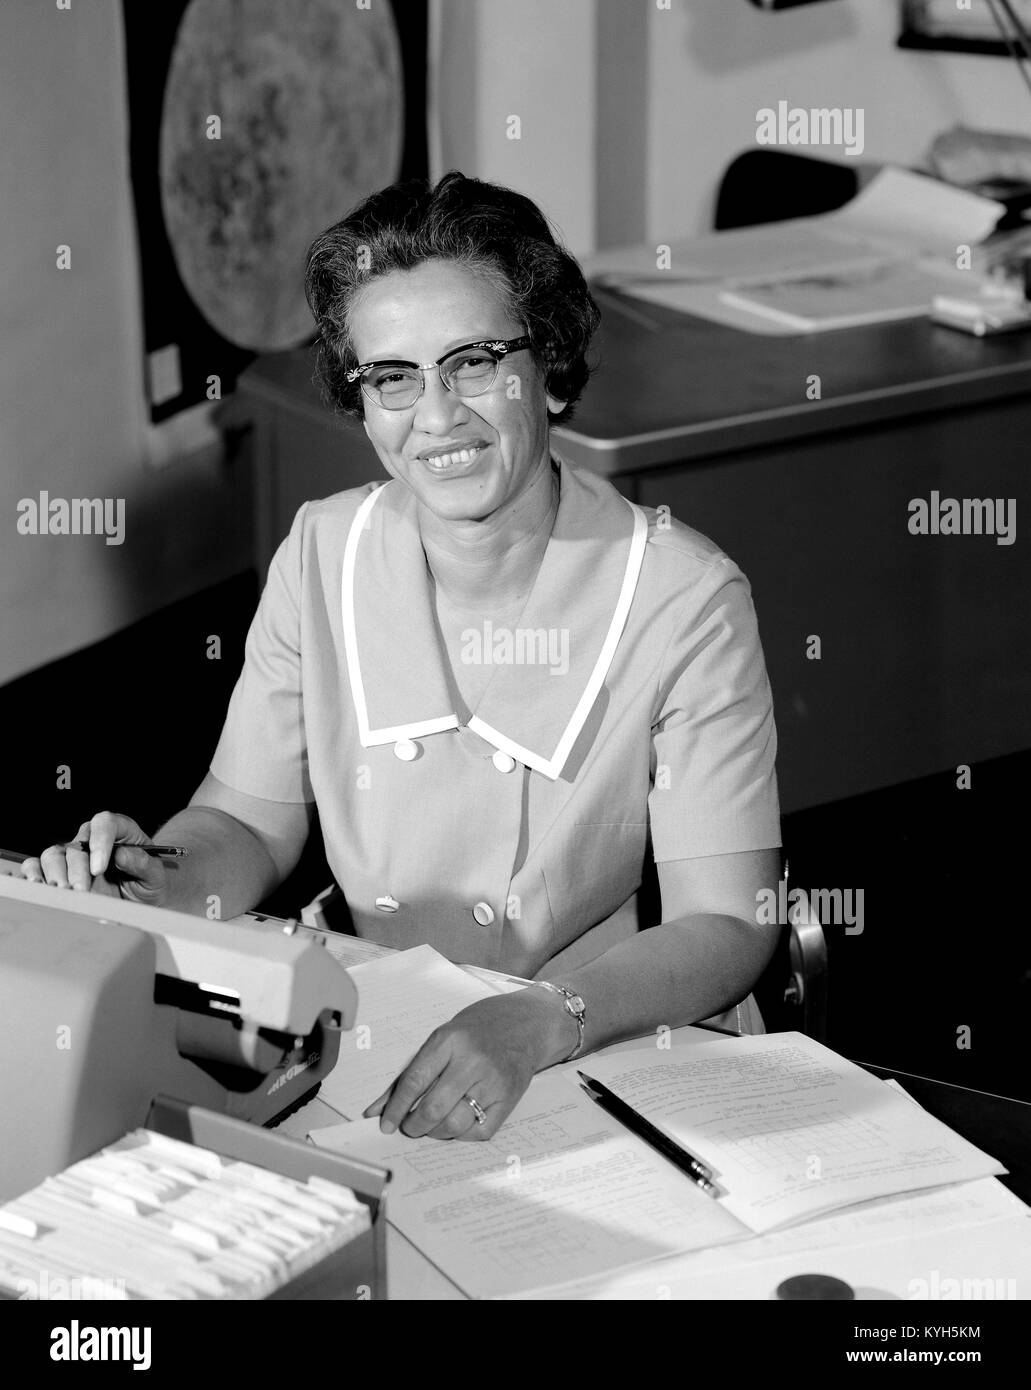 Katherine Johnson, Katherine Coleman Goble Johnson, African-American mathematician who made contributions to the United States' aeronautics and space programs with the early application of digital electronic computers at NASA. Stock Photo